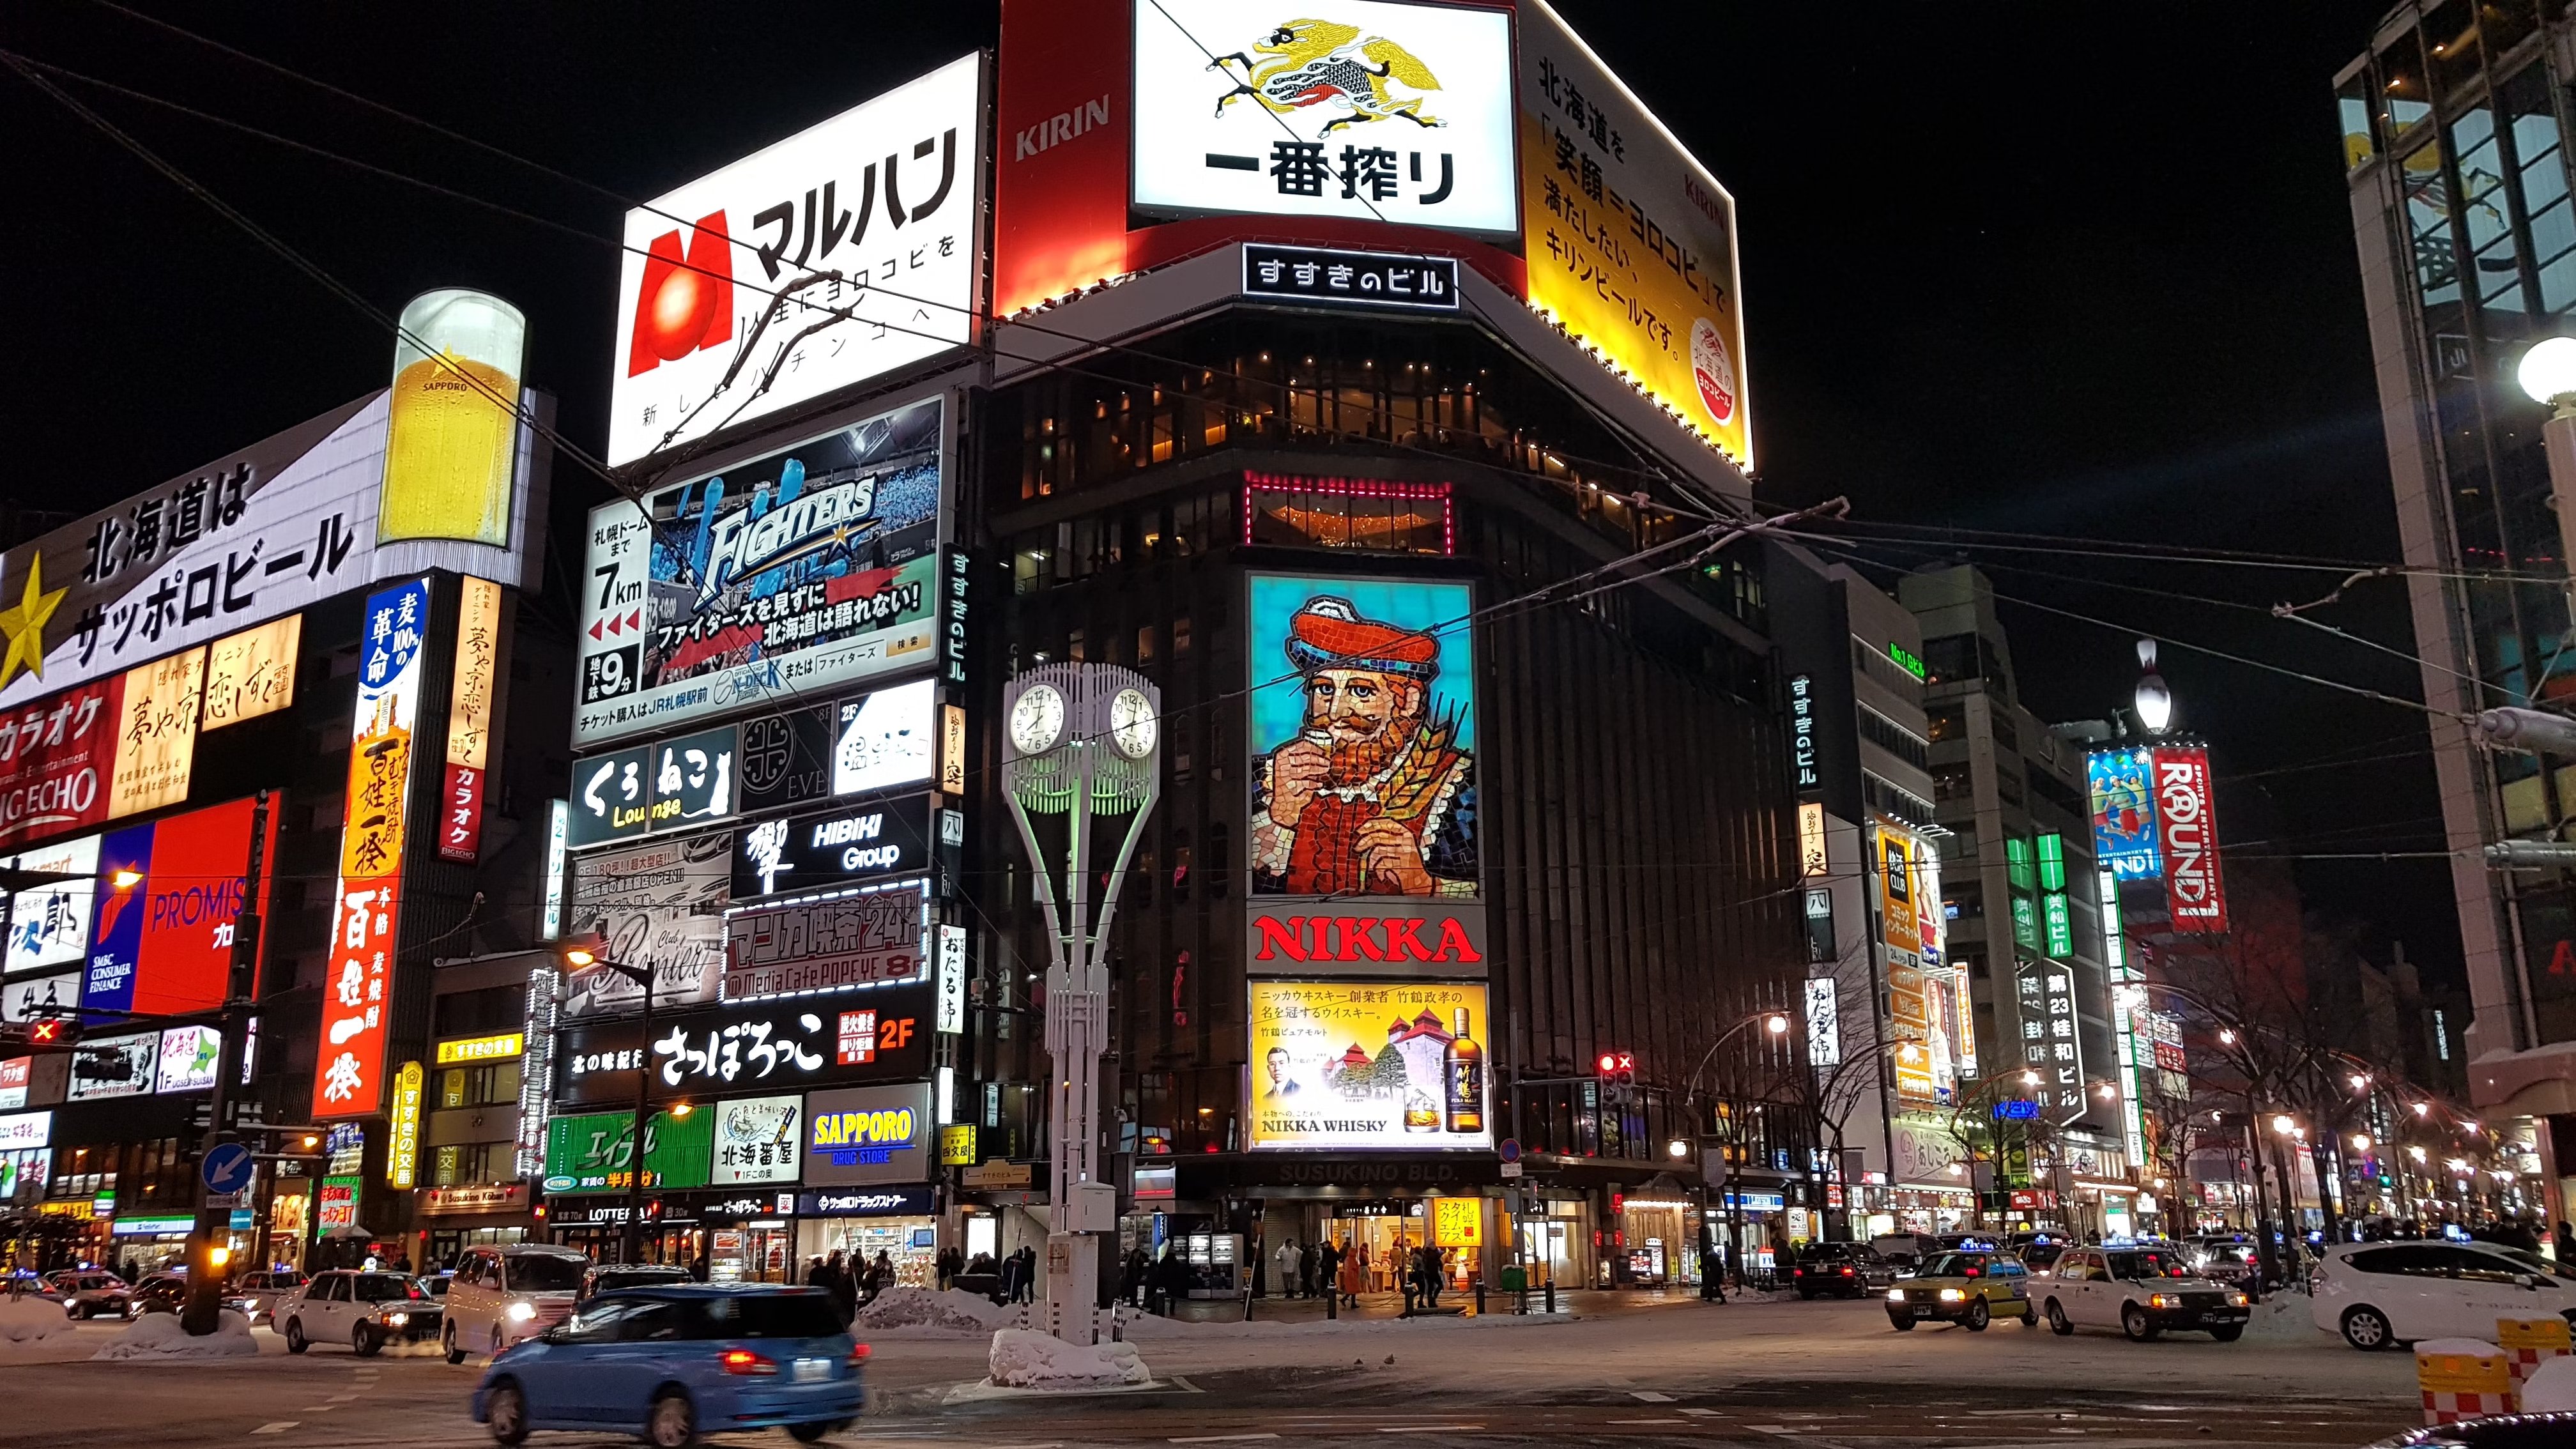 Advertising banners light up an intersection in Susukino, Sapporo's night life district.